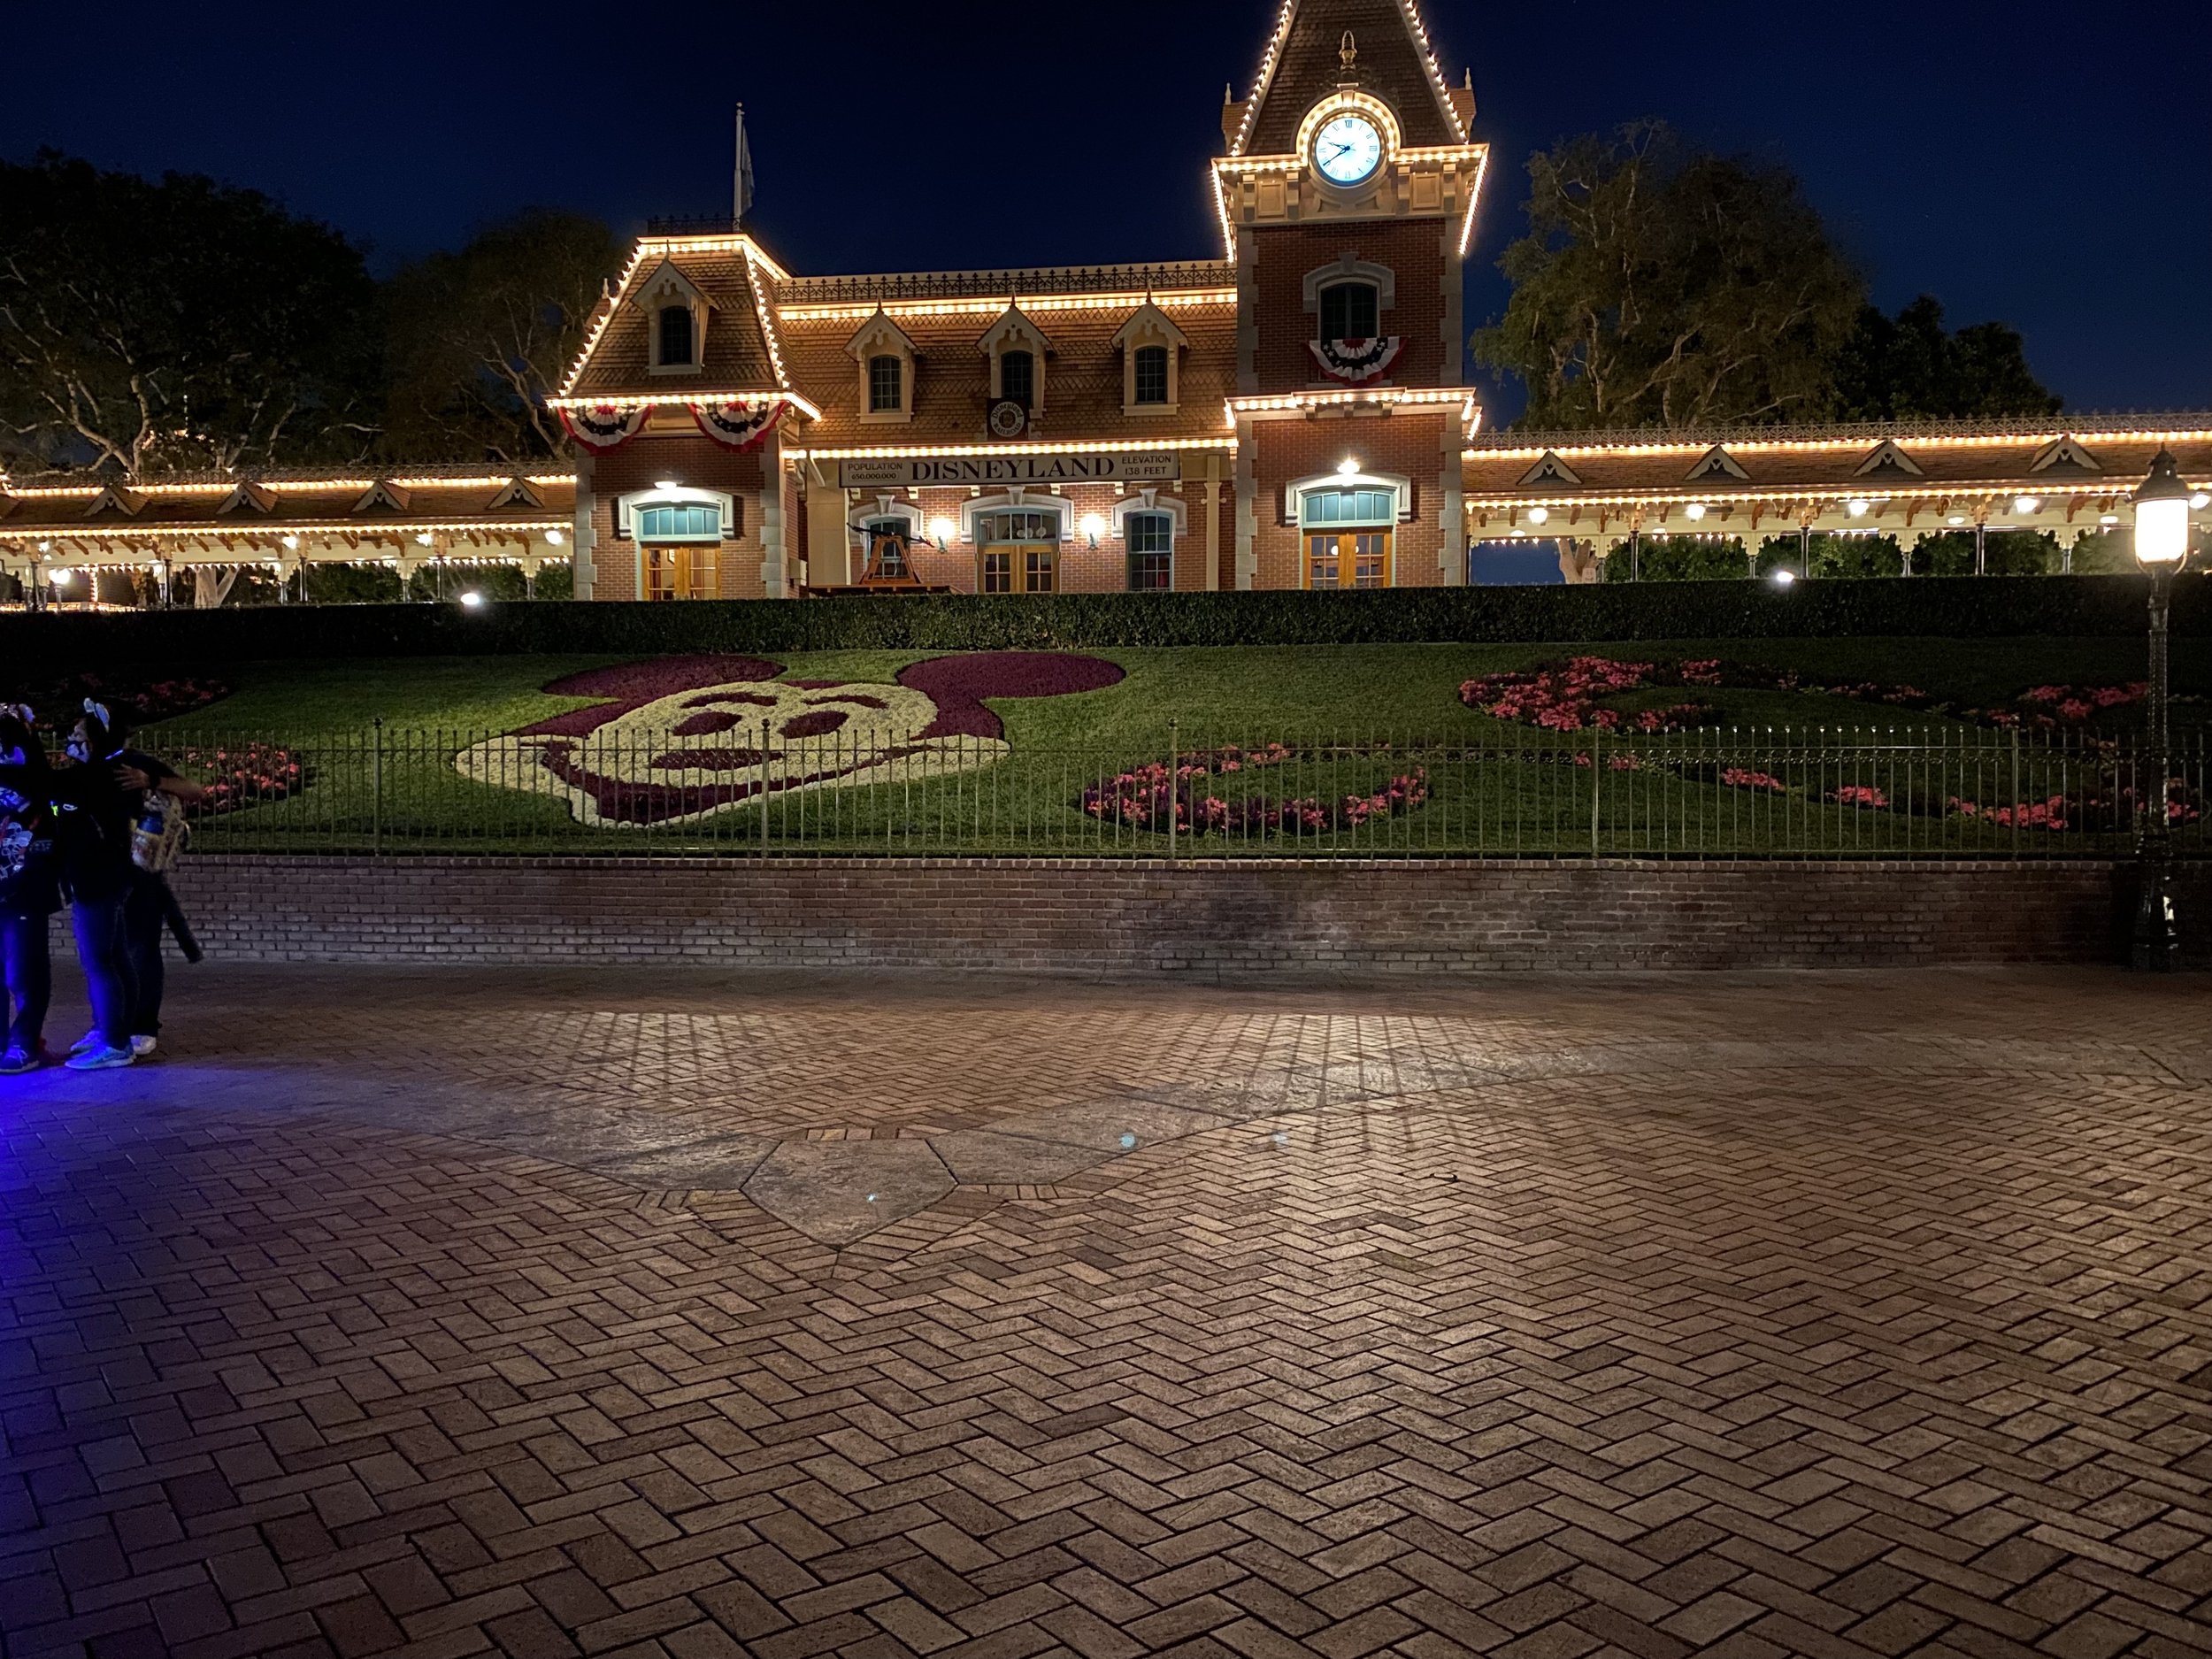  Nighttime view of the Disneyland railroad and the Mickey hedge at the Disneyland entrance 